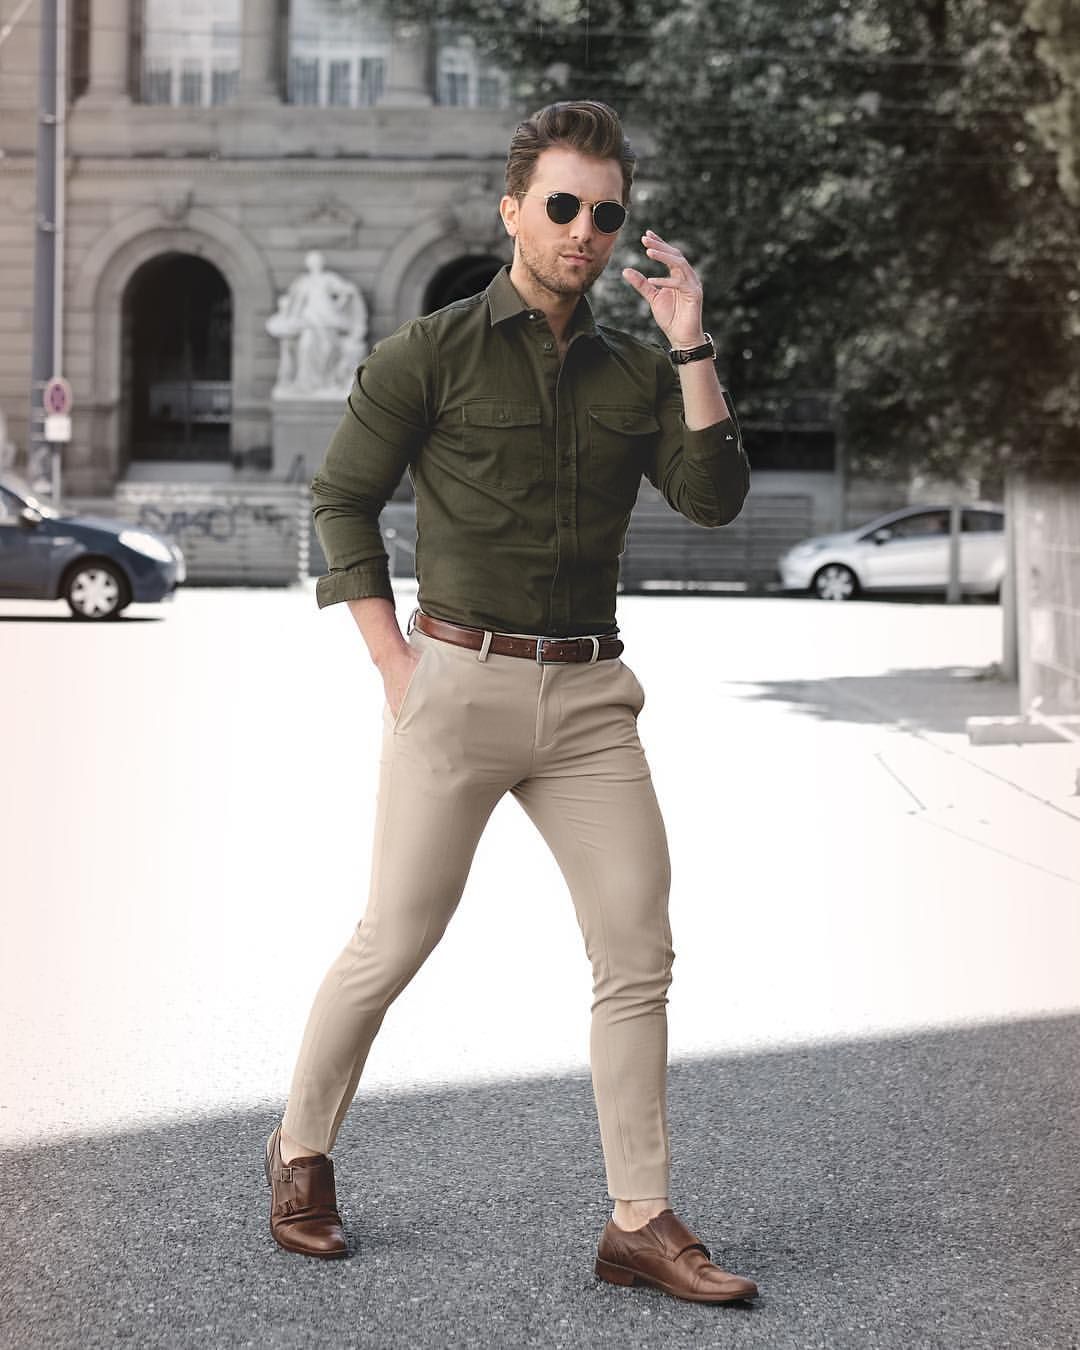 Men's Fashion Hacks For This Season With Neutrals